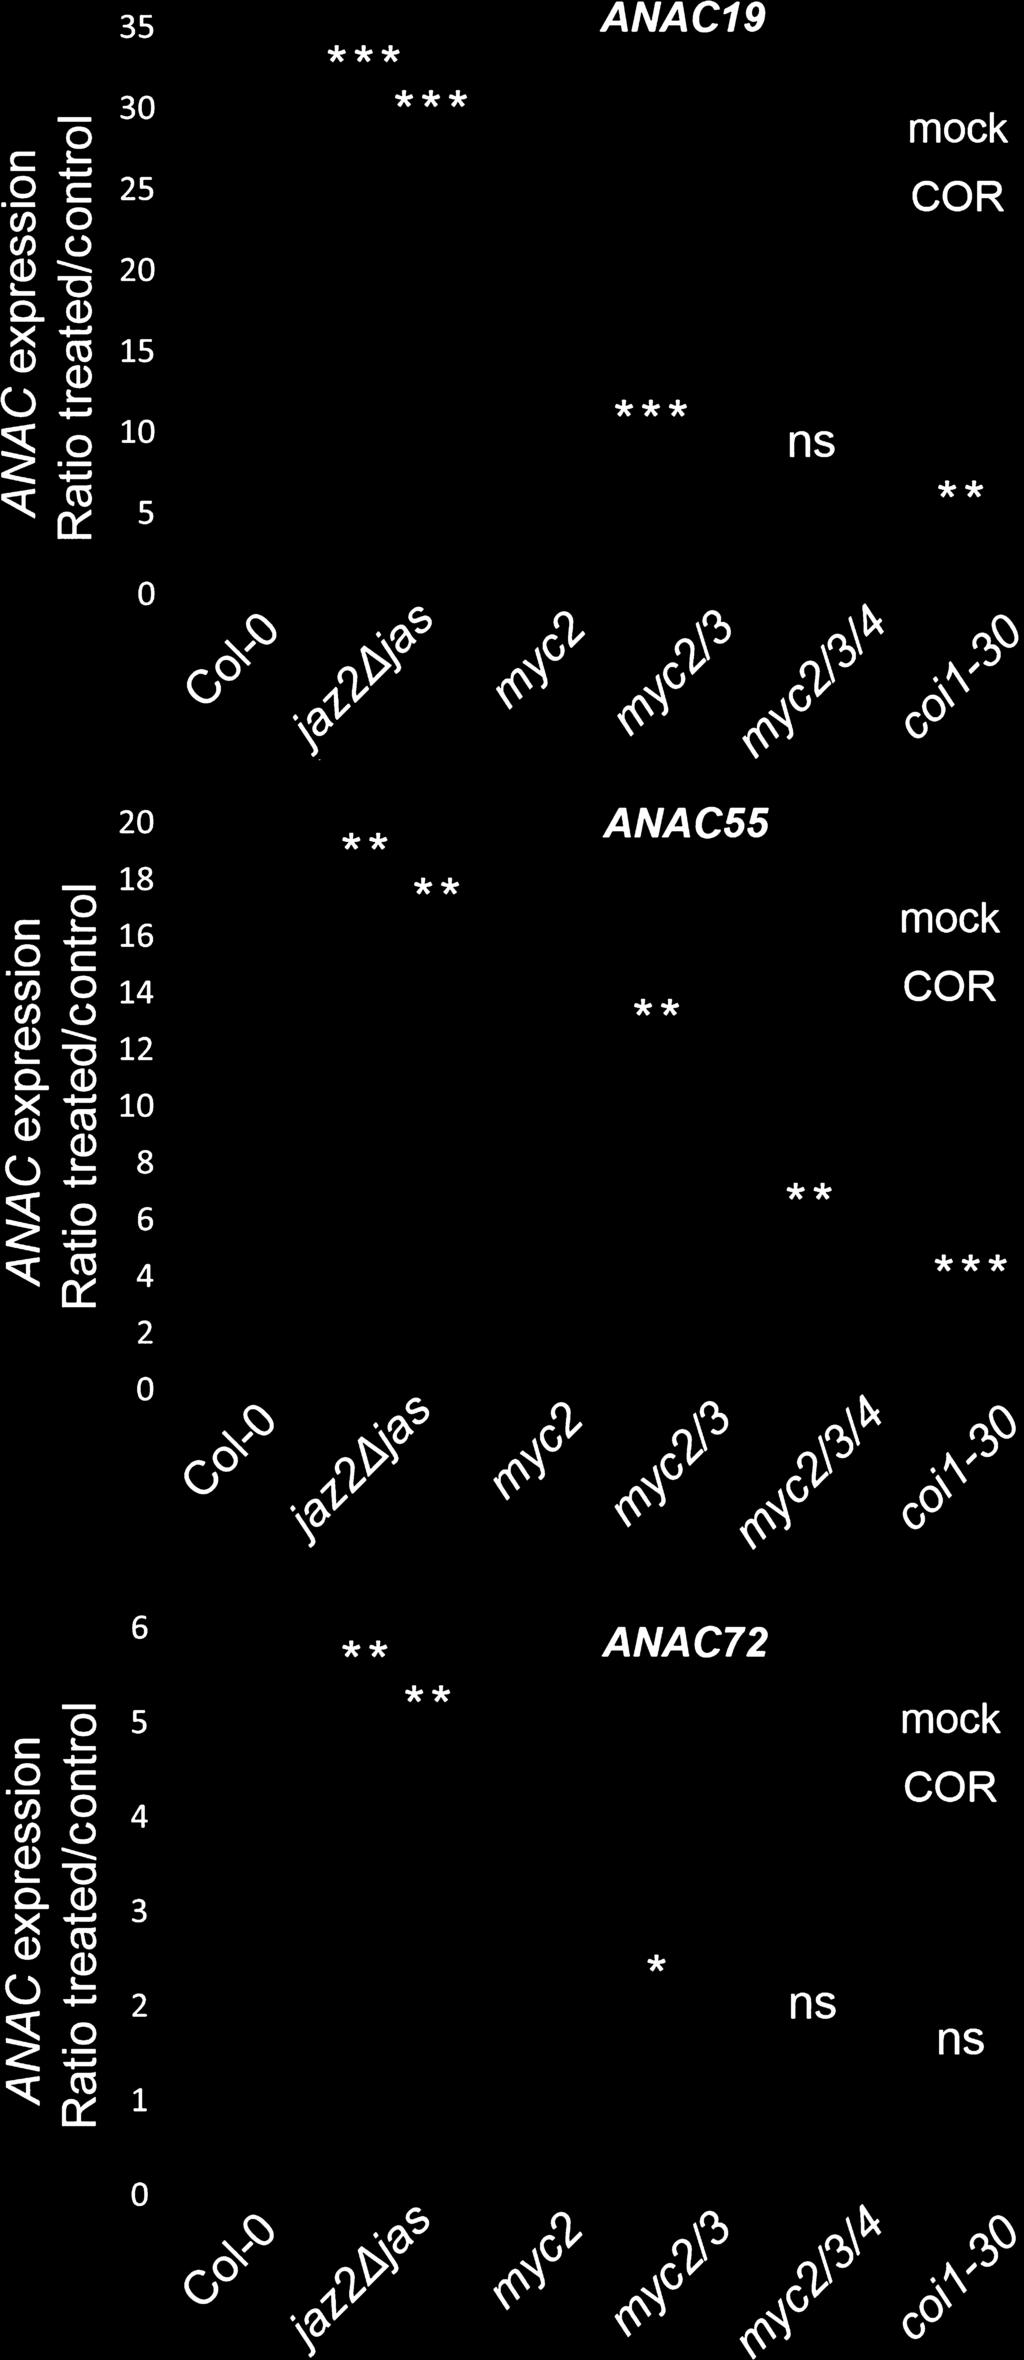 New Phytologist Research 1387 (a) (b) Fig. 6 MYC2 and MYC3 directly bind to the promoter of ANAC19, ANAC55 and ANAC72 genes.